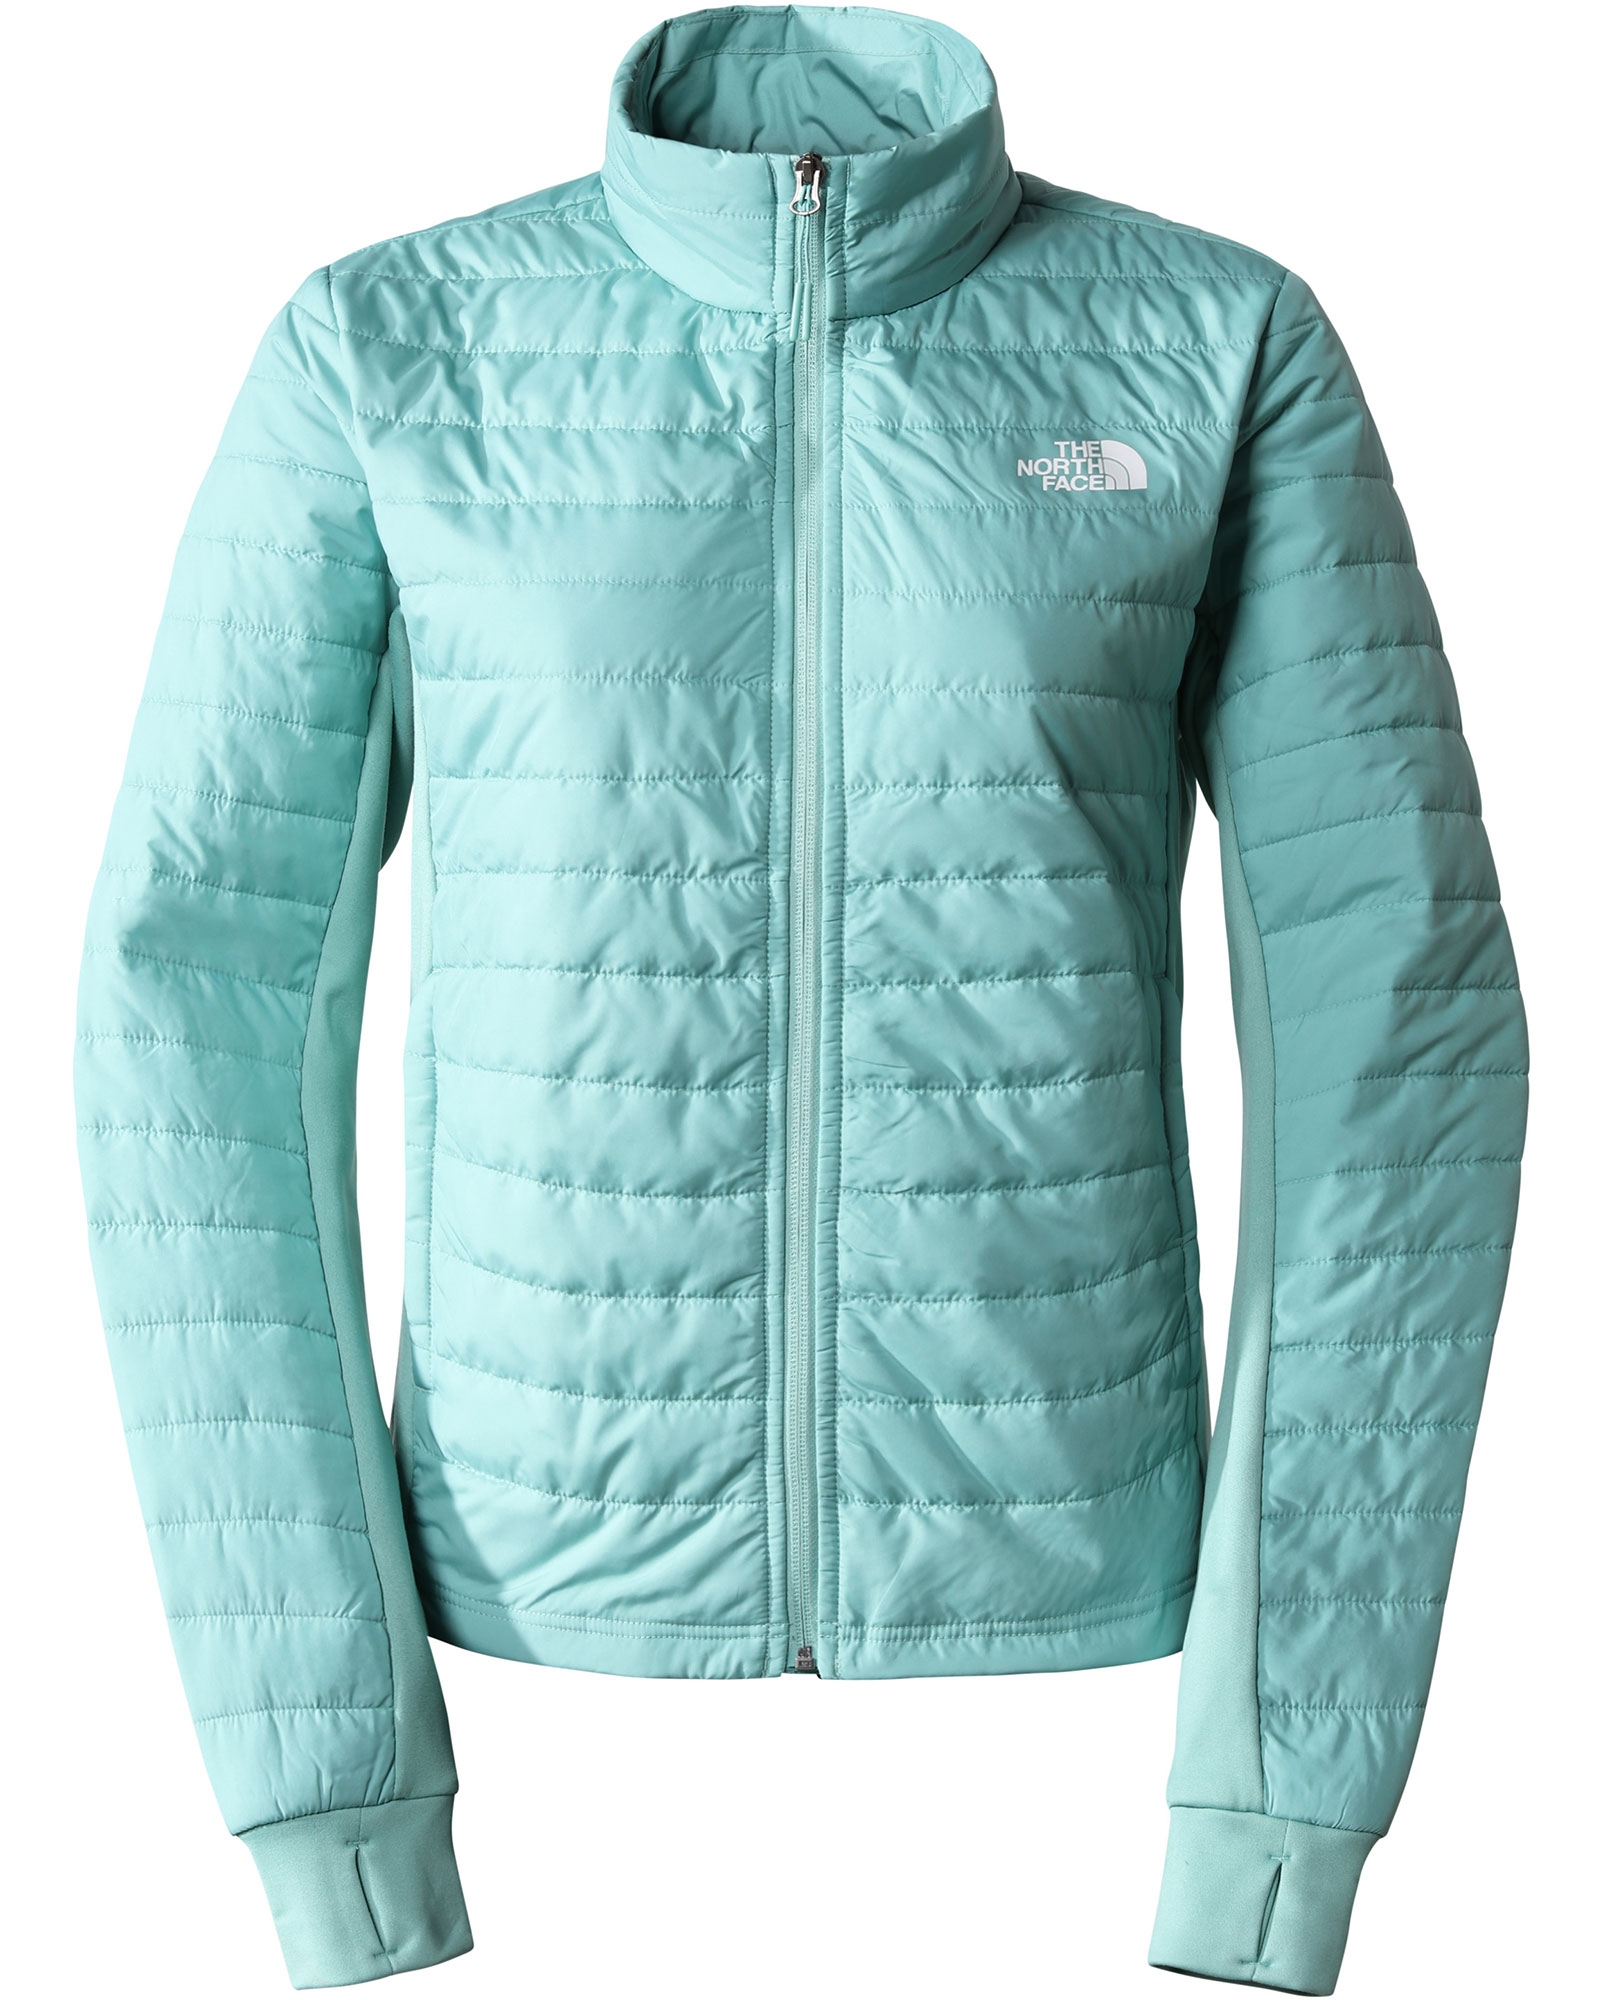 The North Face Canyonlands Hybrid Women’s Insulated Jacket - Wasabi S